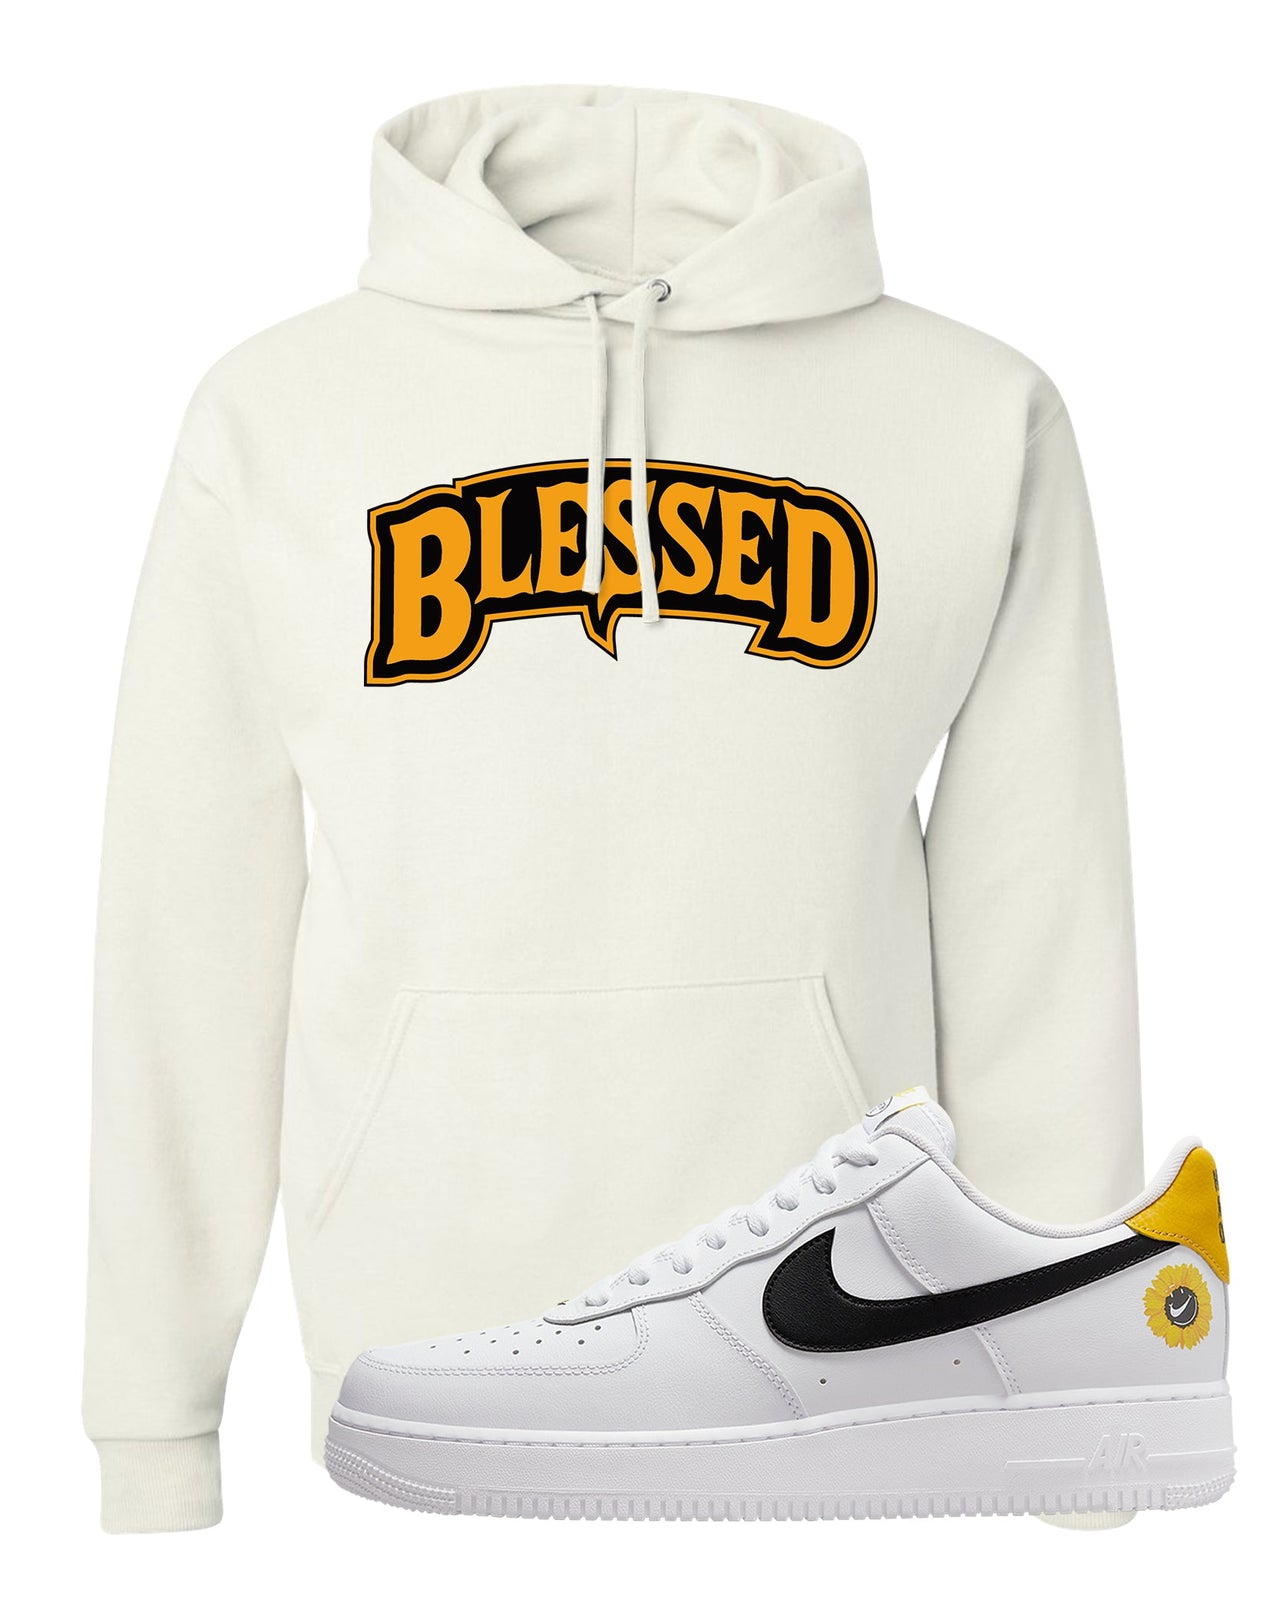 Have A Nice Day AF1s Hoodie | Blessed Arch, White